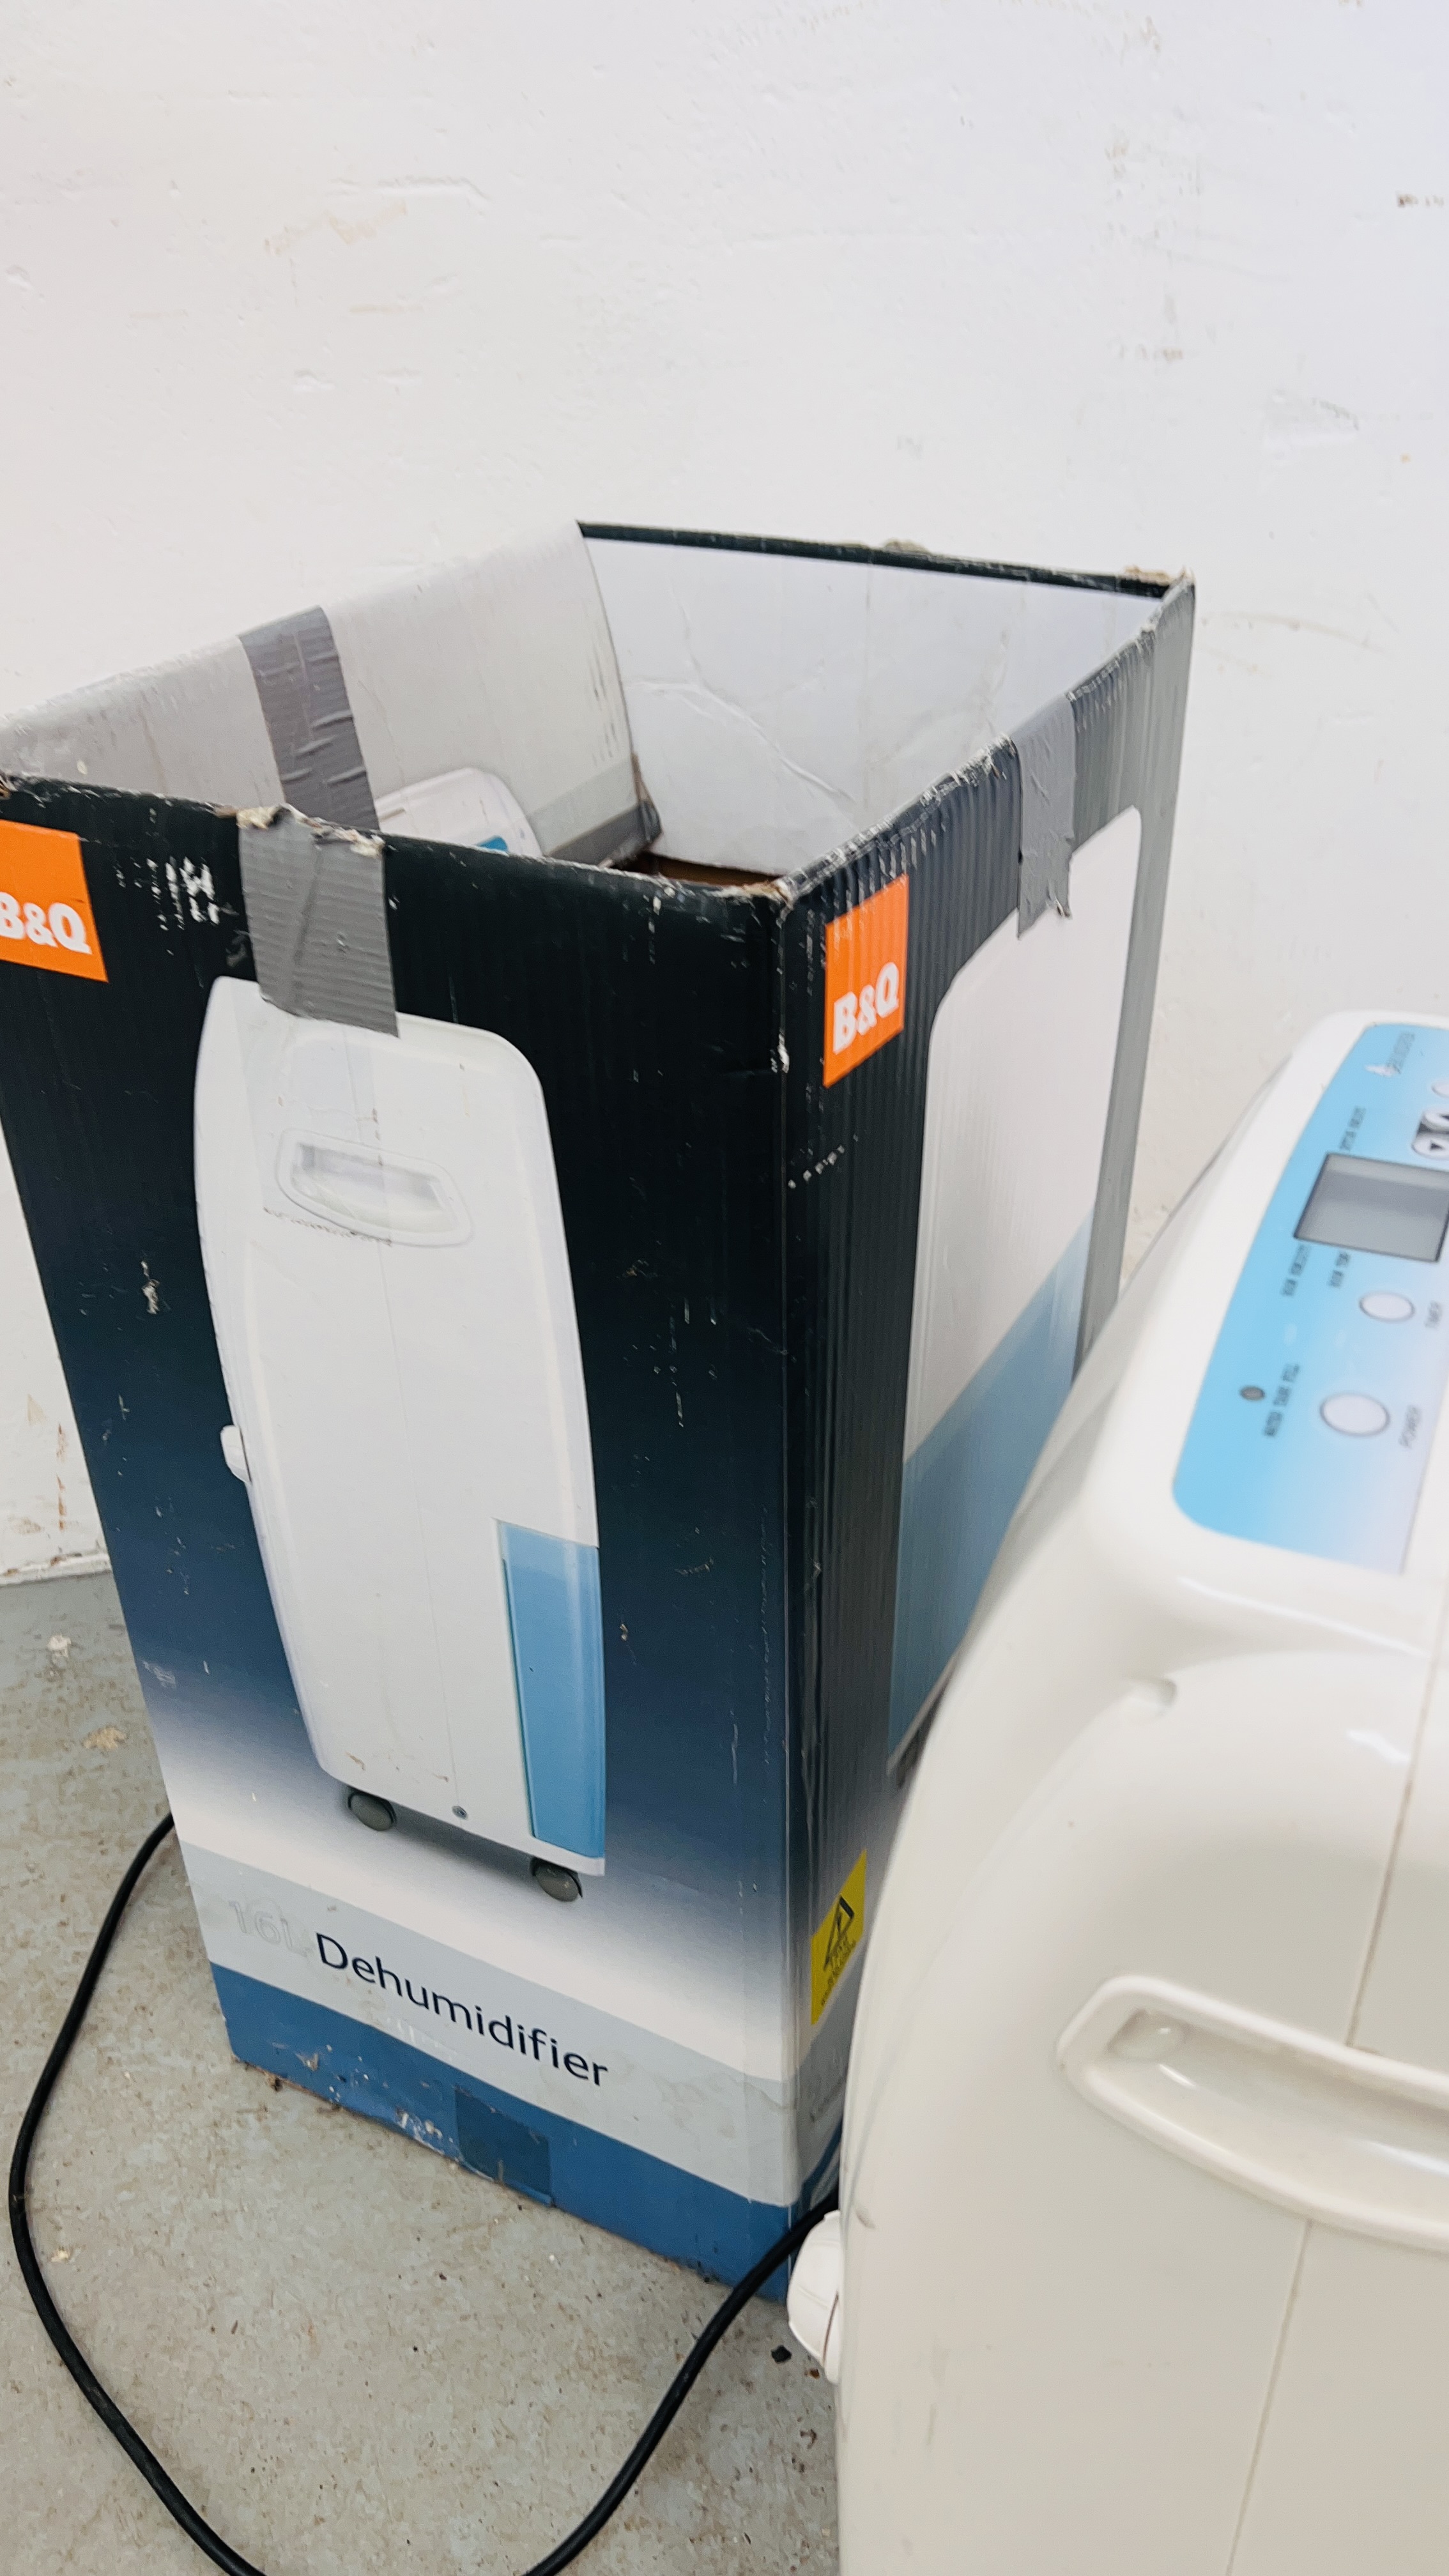 A 16L DEHUMIDIFIER ALONG WITH ORIGINAL BOX - SOLD AS SEEN. - Image 5 of 5